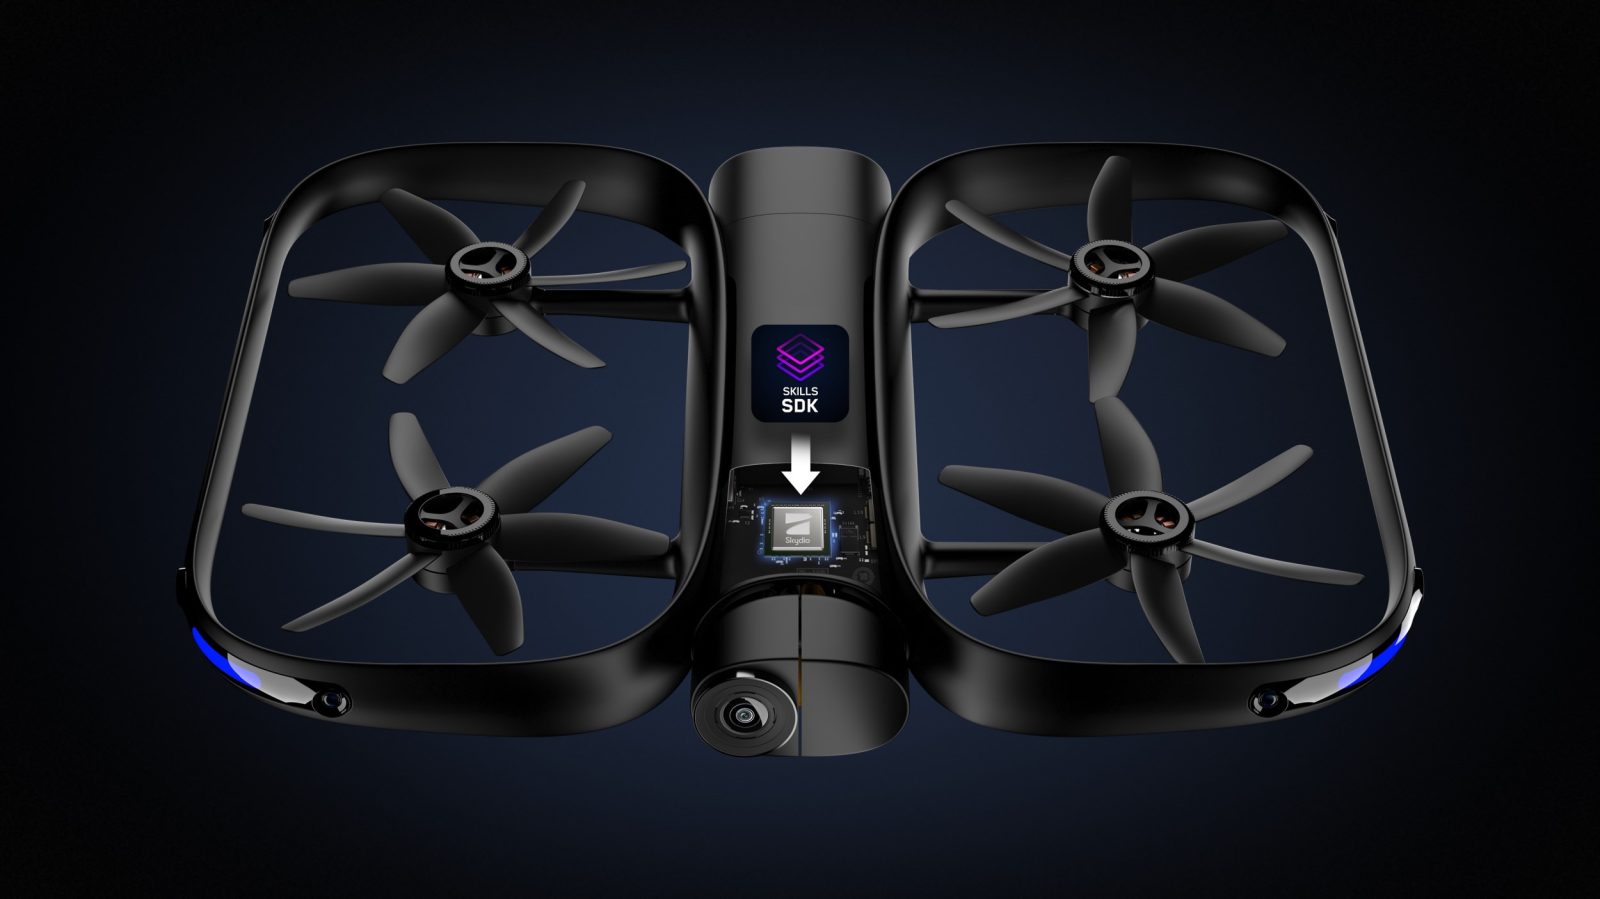 Skydio launches drone developer platform, lowers R1's price and offers new One-Shot Skills, Cable-Cam options